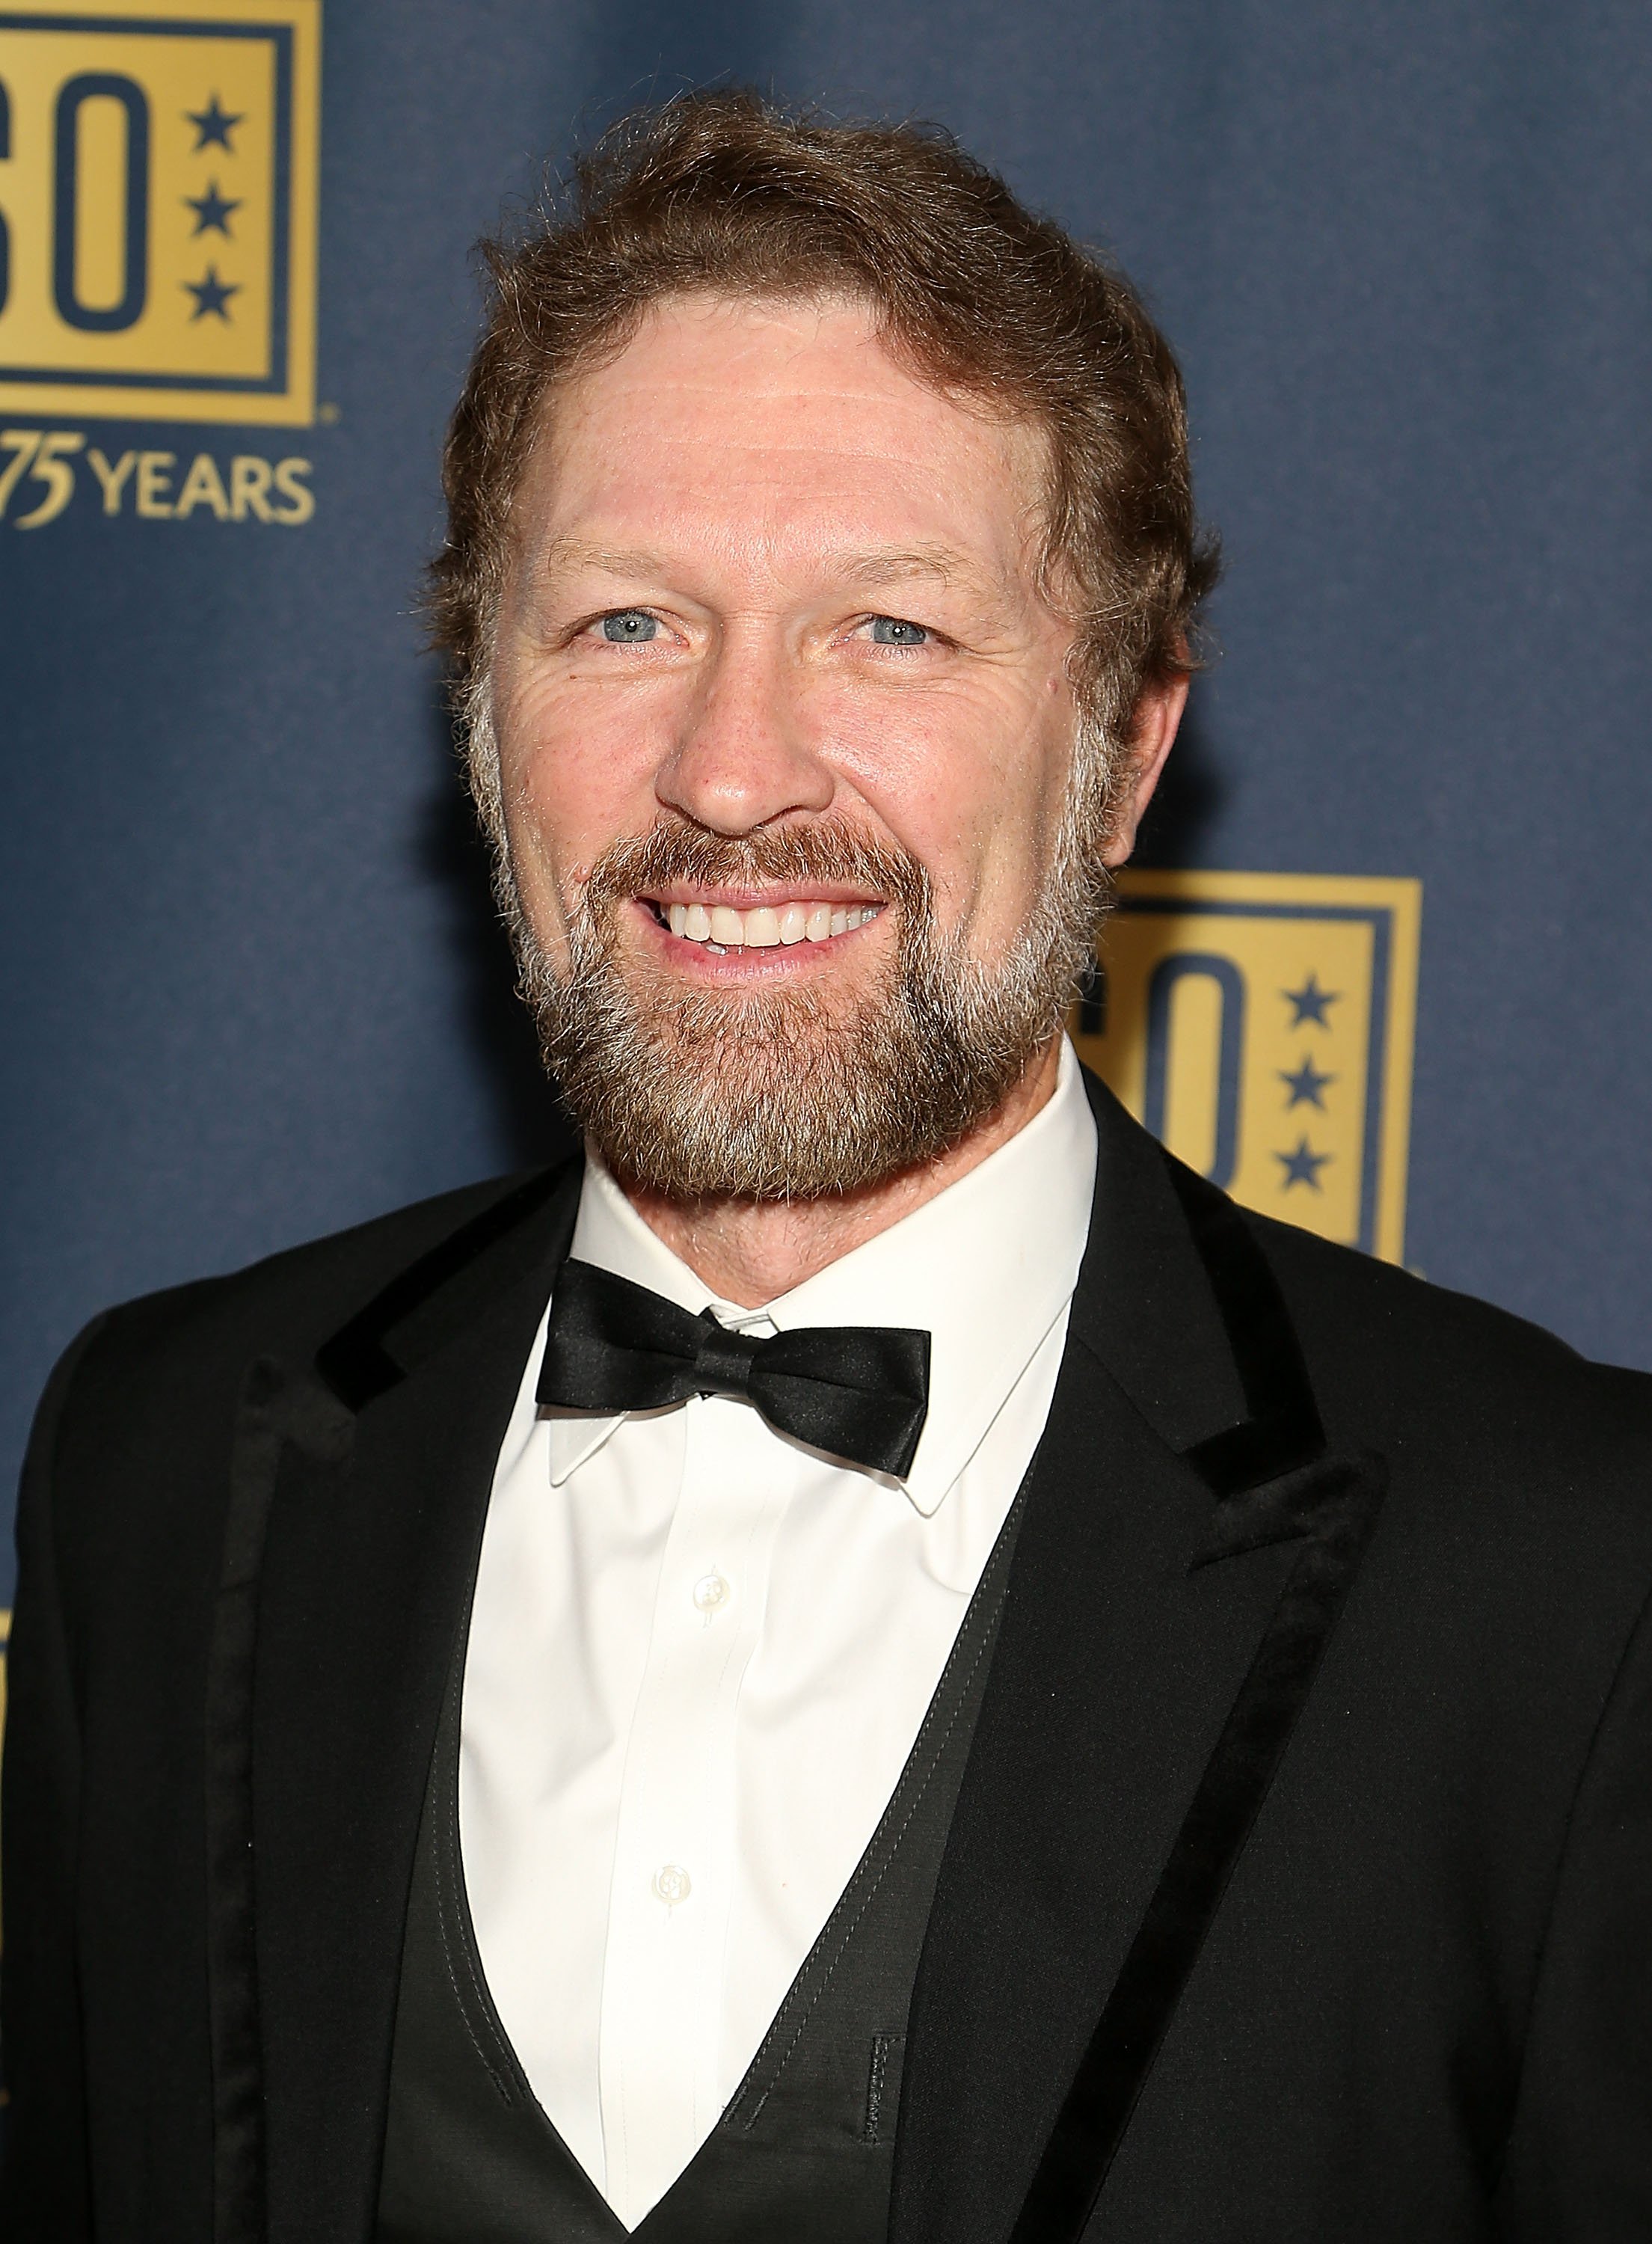 Craig Morgan attends the 2016 USO Gala on October 20, 2016, at DAR Constitution Hall in Washington, DC. | Source: Getty Images